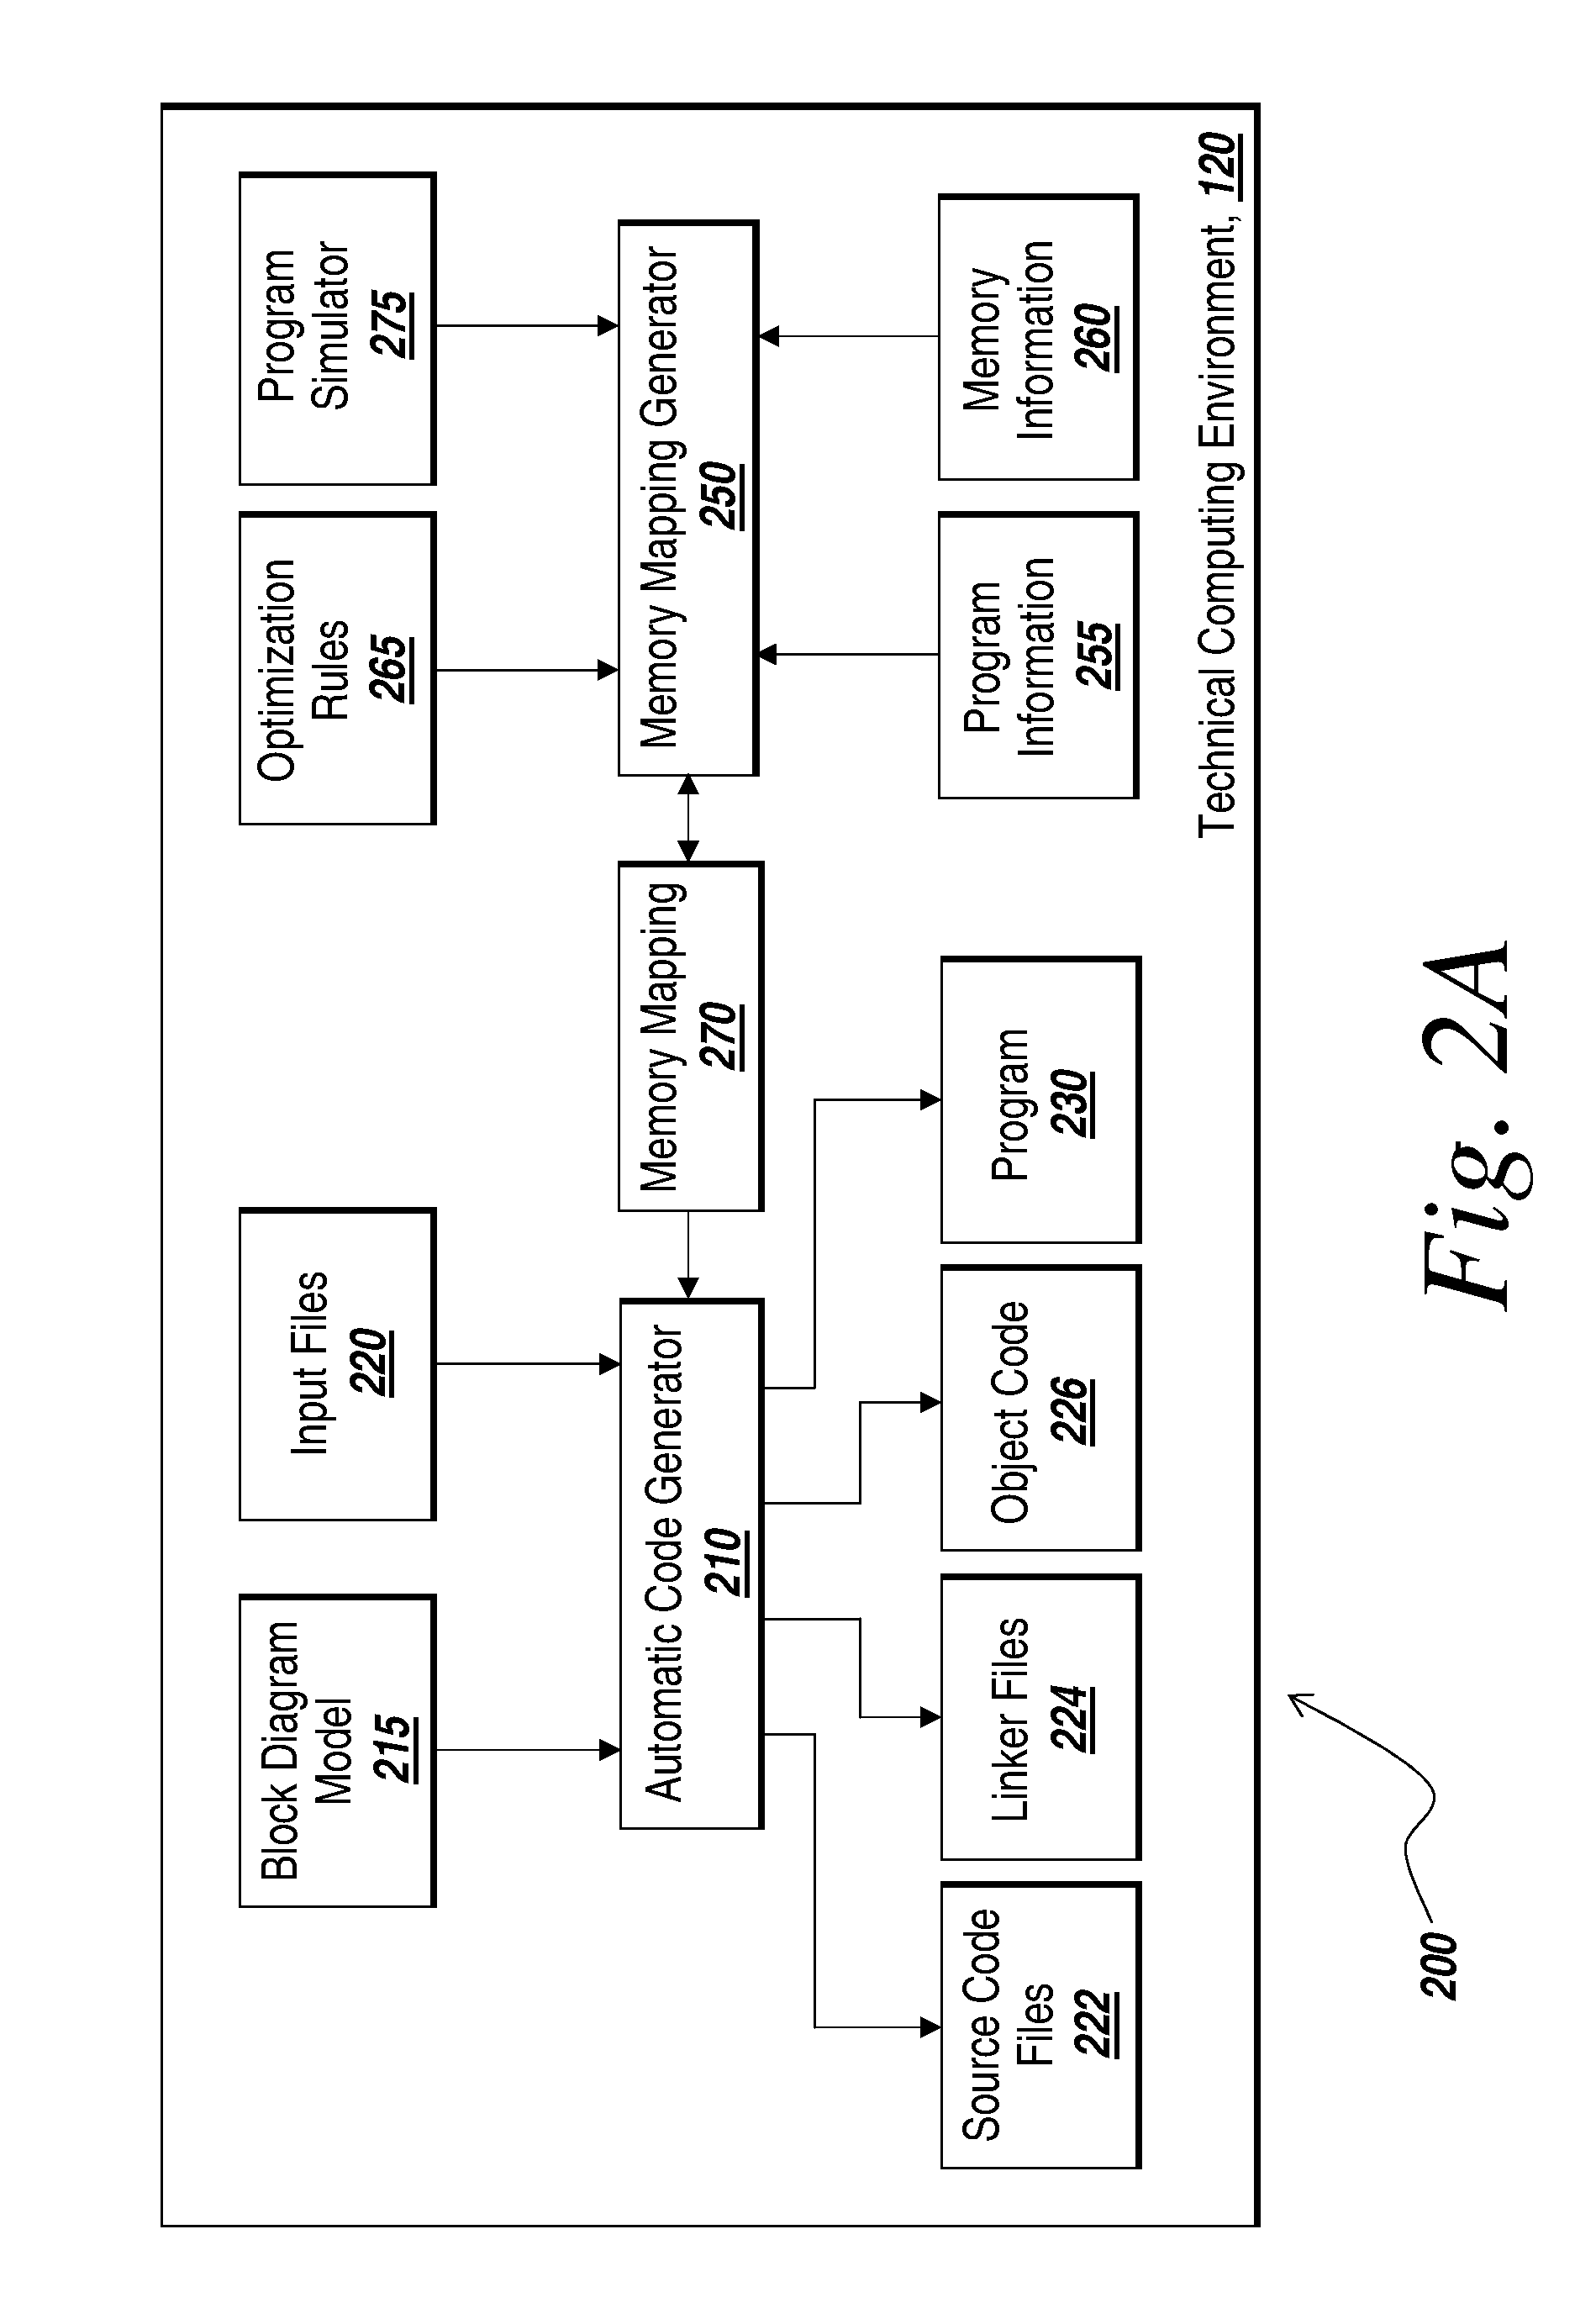 Memory mapping for single and multi-processing implementations of code generated from a block diagram model